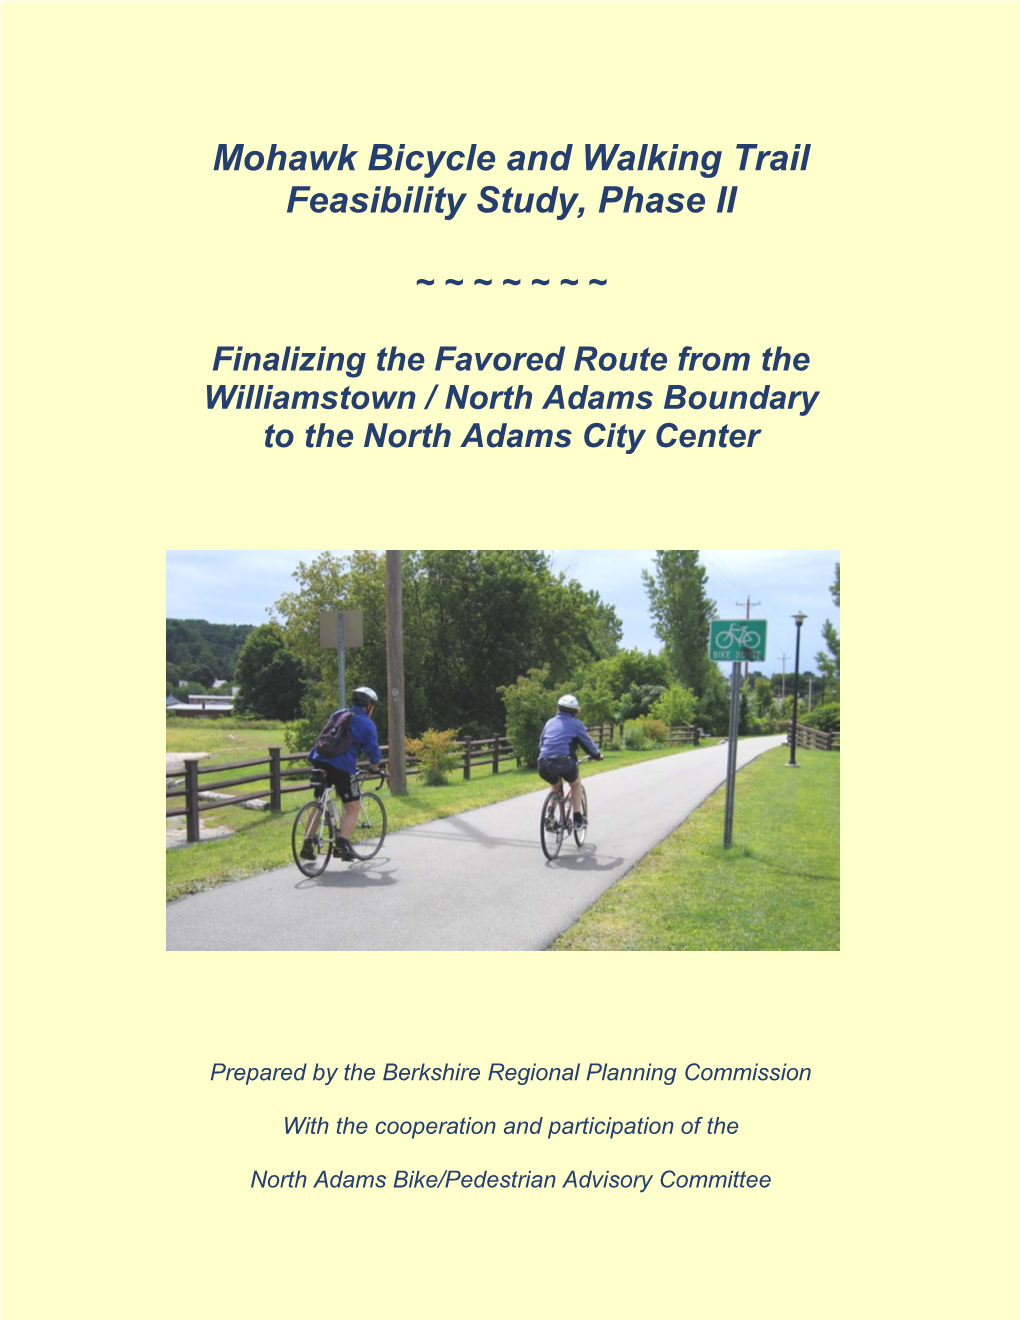 Mohawk Bicycle and Walking Trail Feasibility Study, Phase II (BRPC)